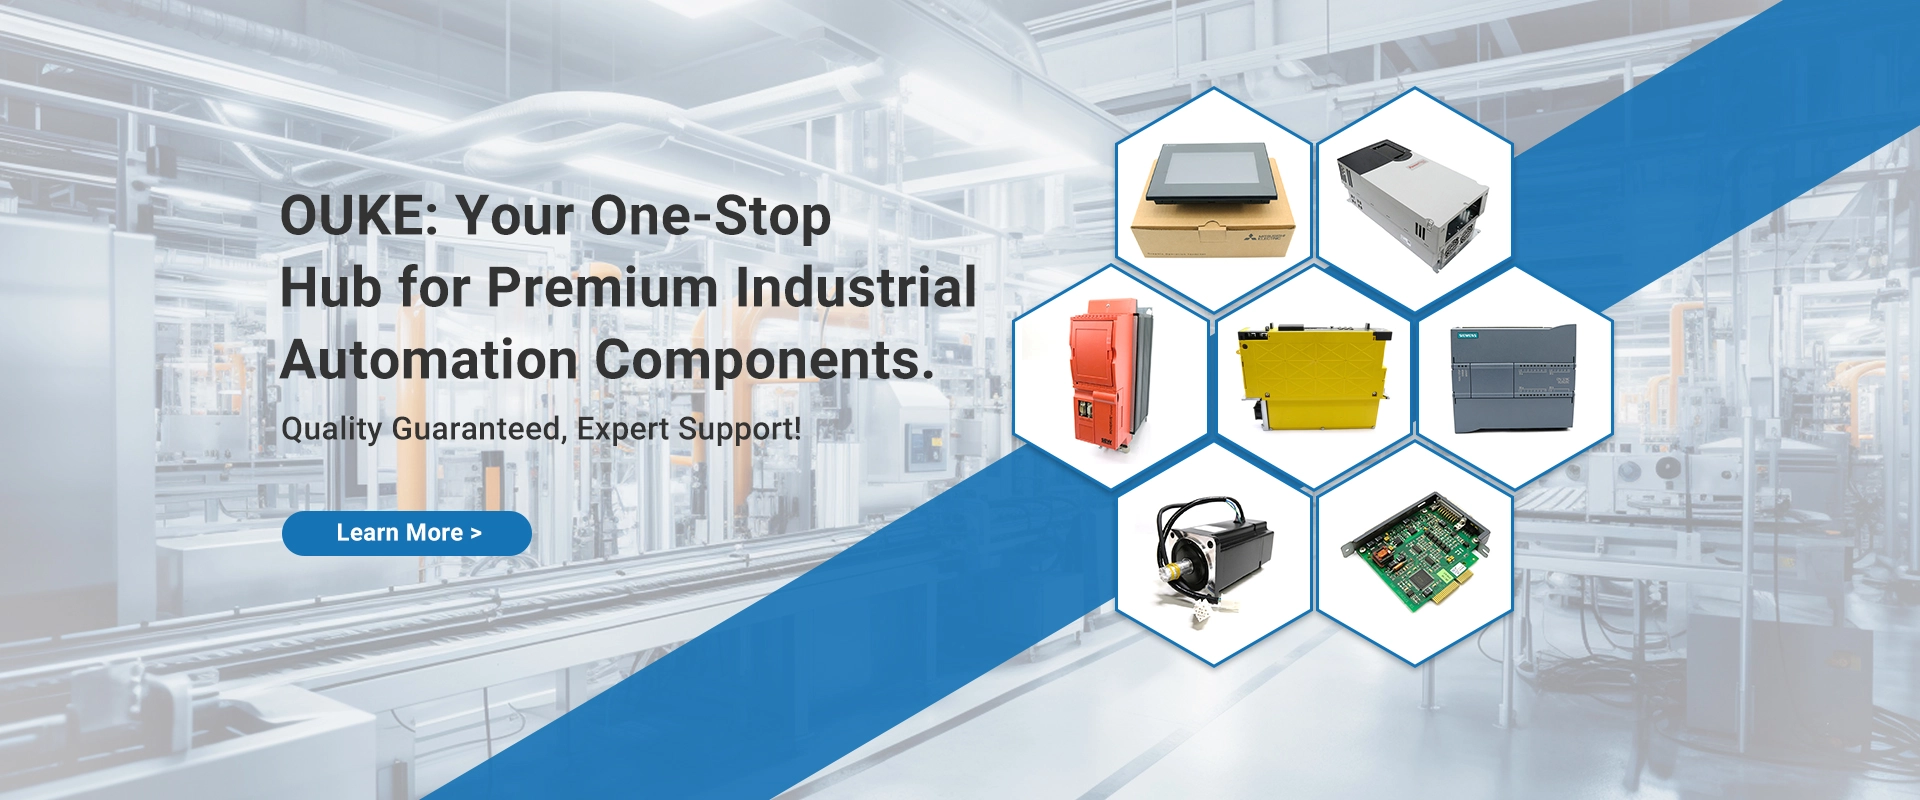 OUKE: Your One-Stop Hub for Premium Industrial Automation Components